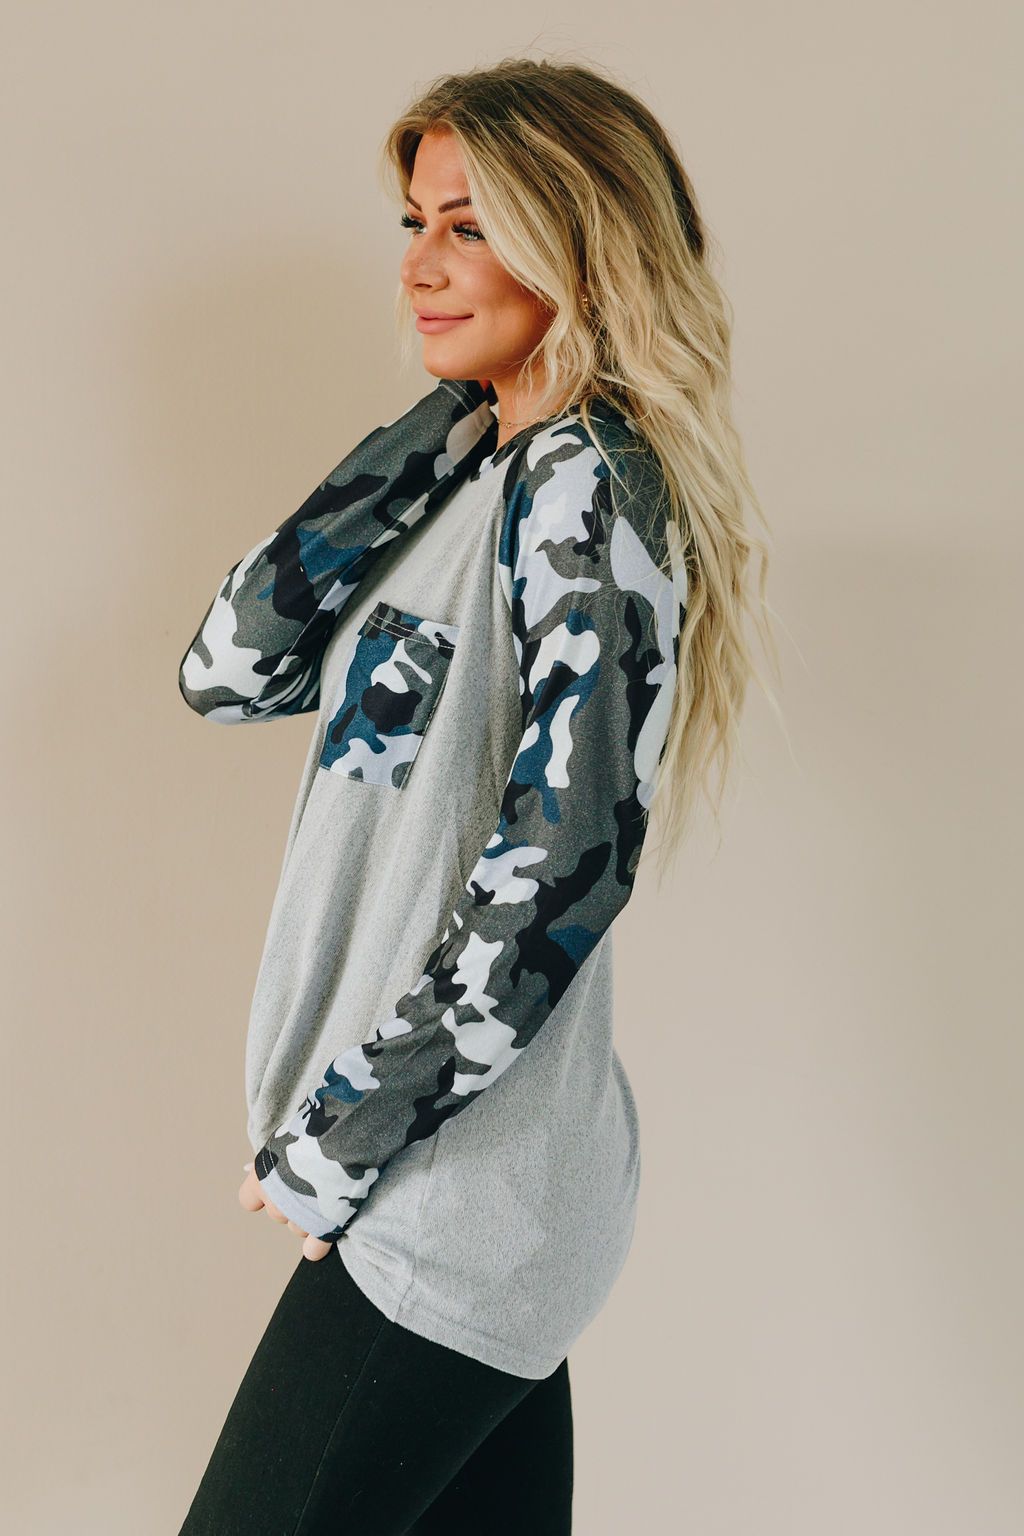 Jeremy Camo Top Stay Warm In Style